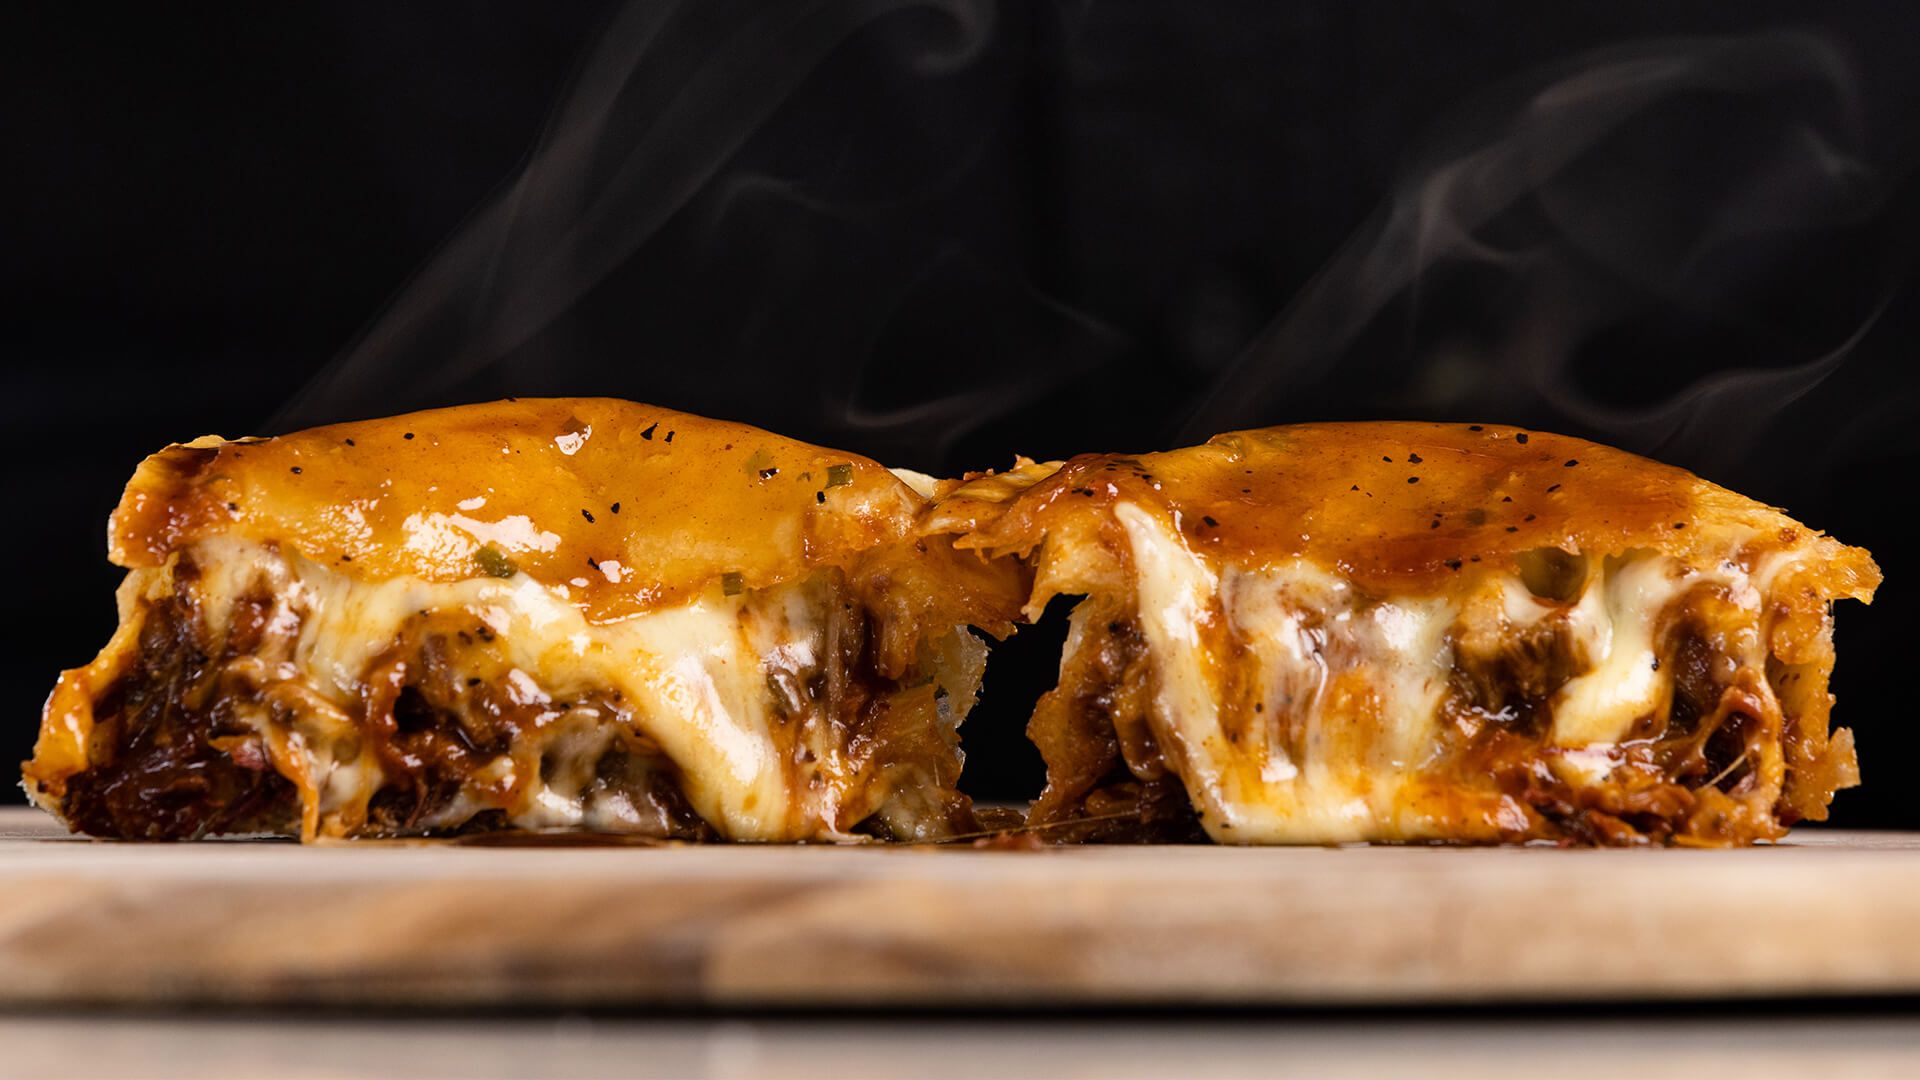 Brisket and Cheese Pies